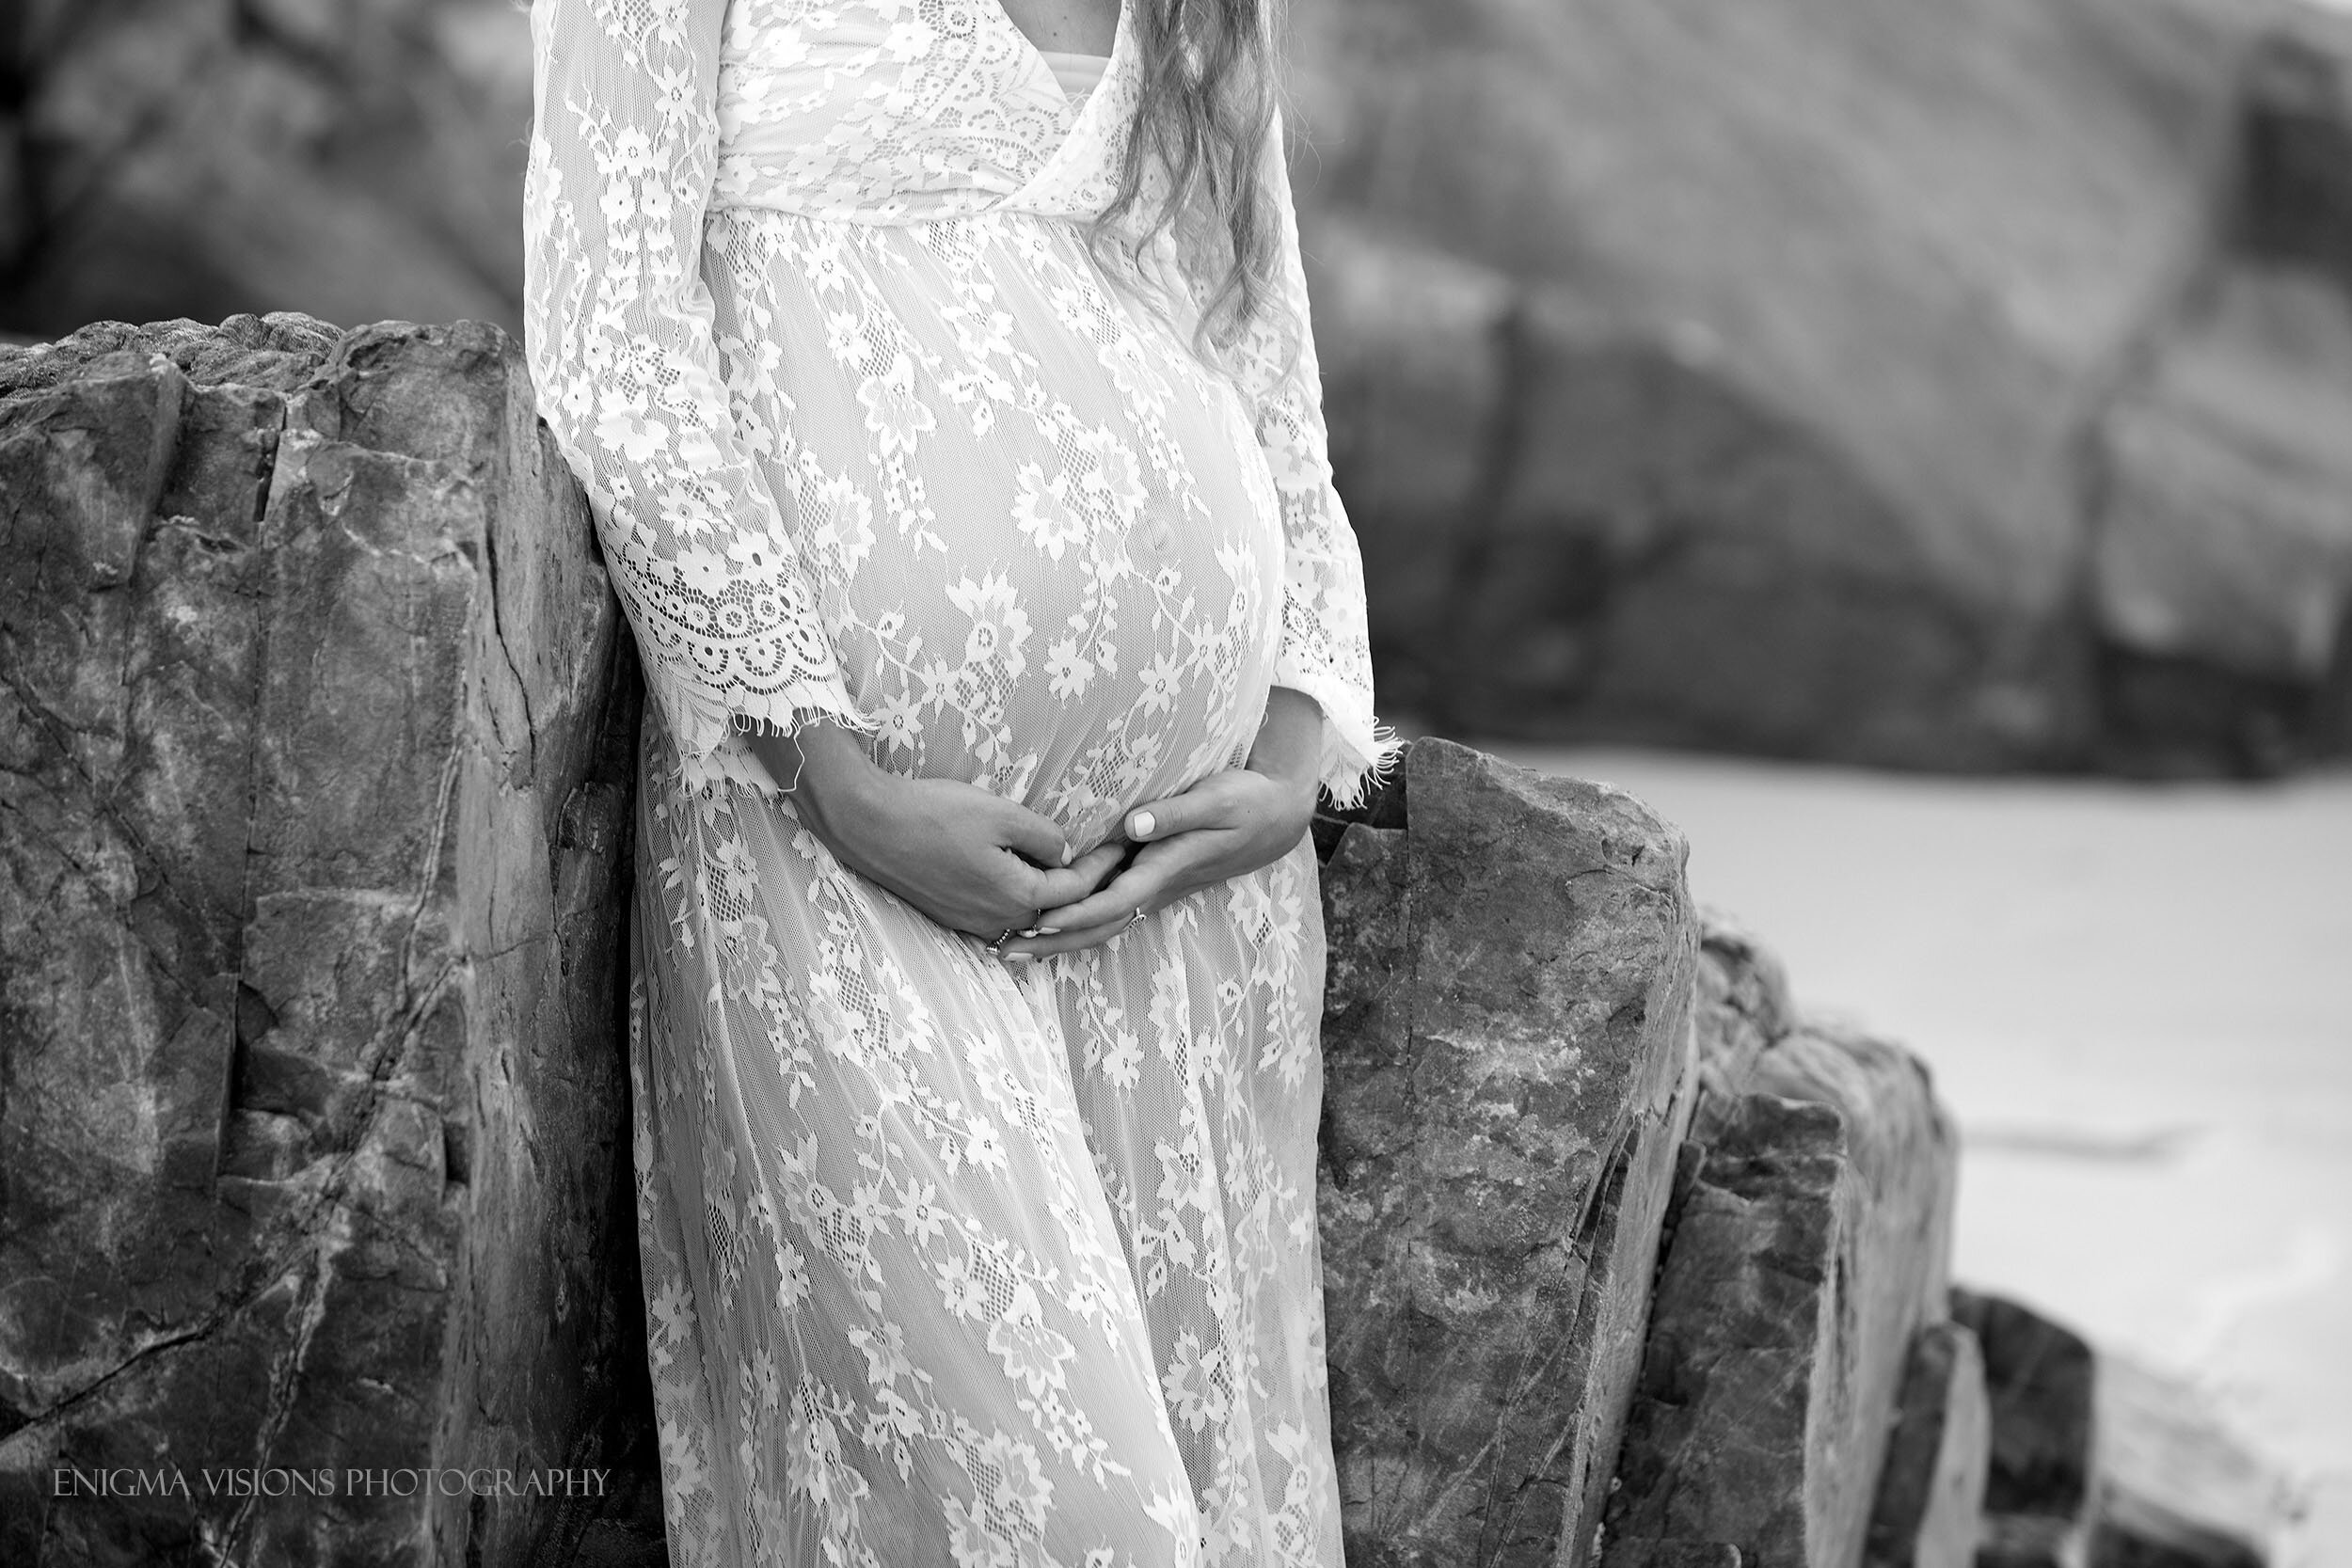 enigma-visions-photography-maternity-mahlea (7).jpg